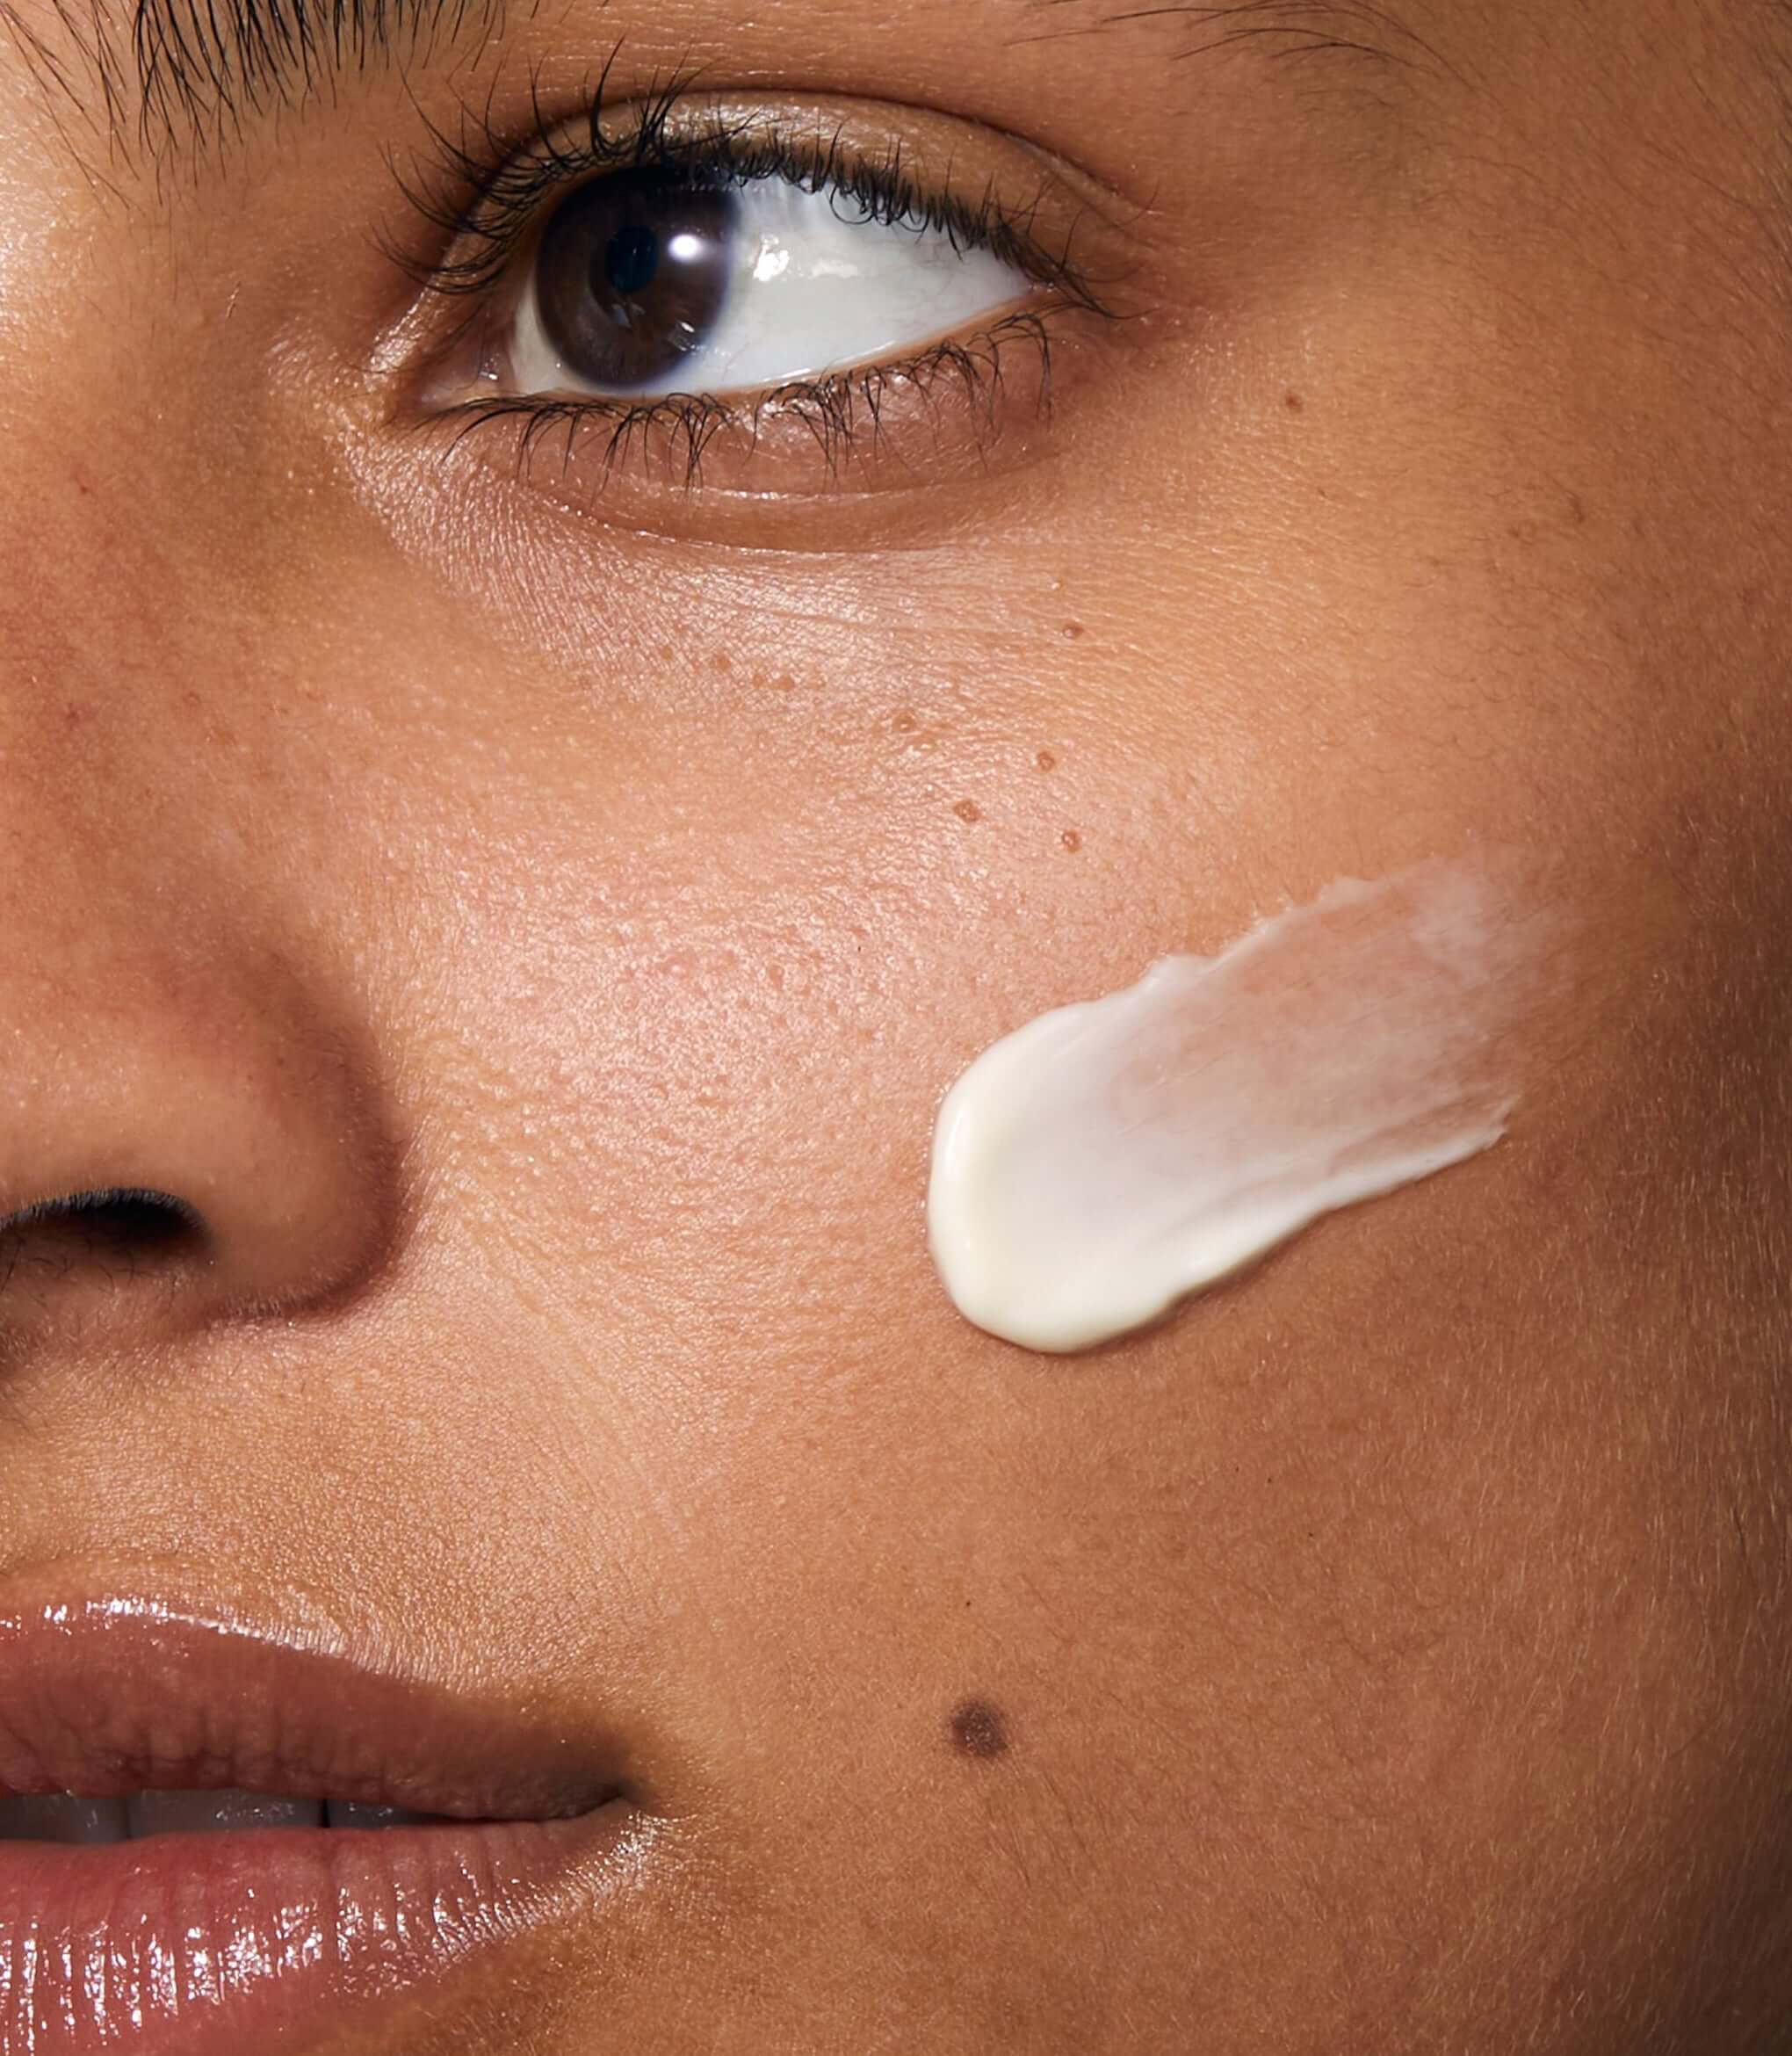  A tight shot featuring the model's facial close-up, showcasing the application of Cushioning Day Cream.